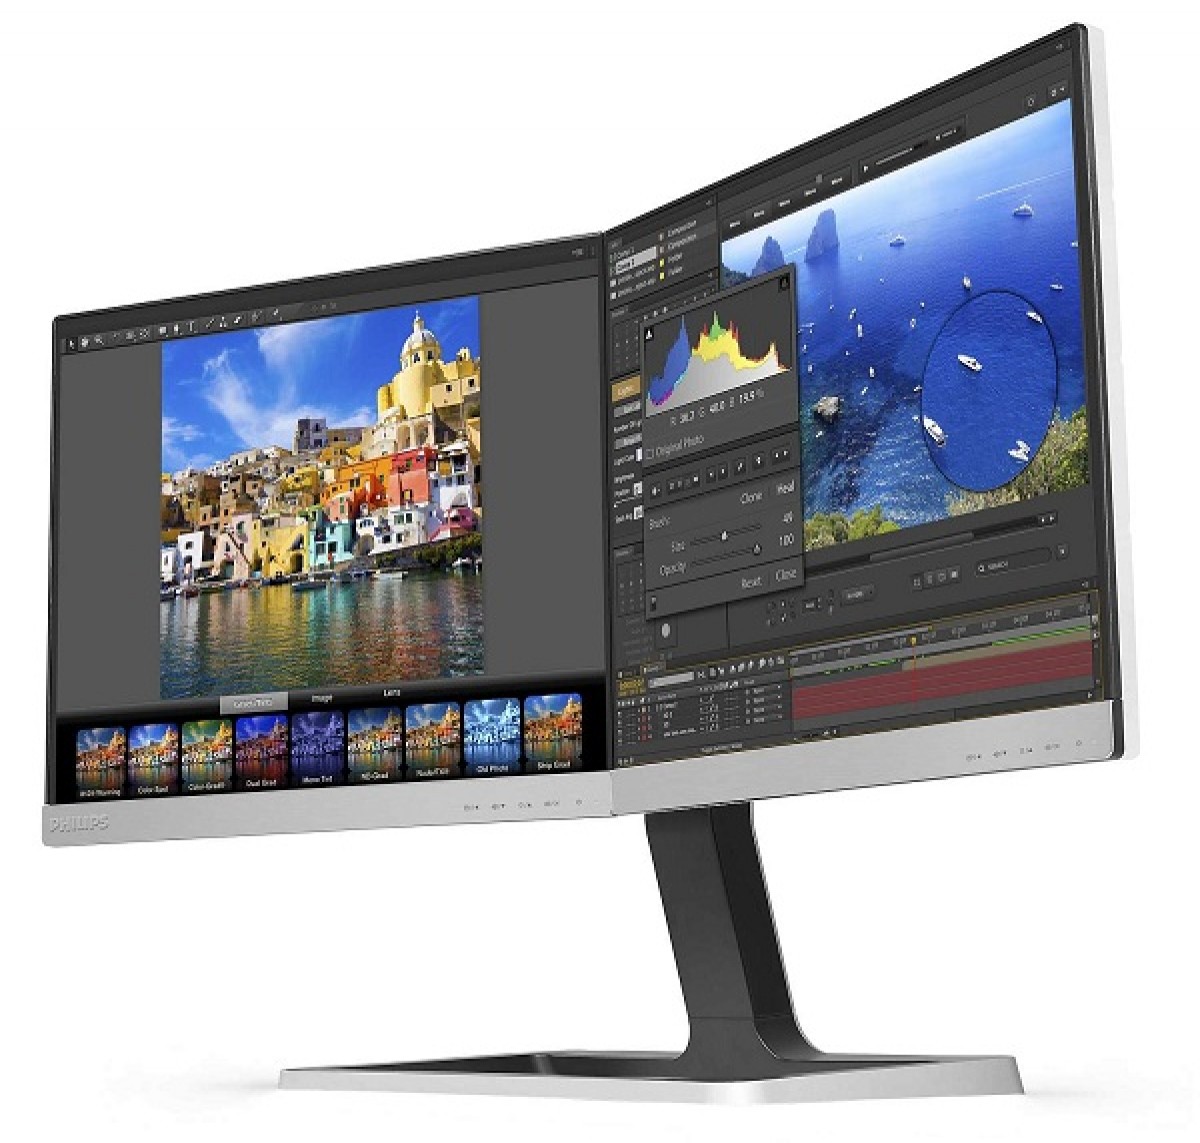 https://www.cowcotland.com/images_amp.php?url=images/news/2015/03/philips-two-in-one-lcd-monitor-double-ecran-oriente-pro.jpg